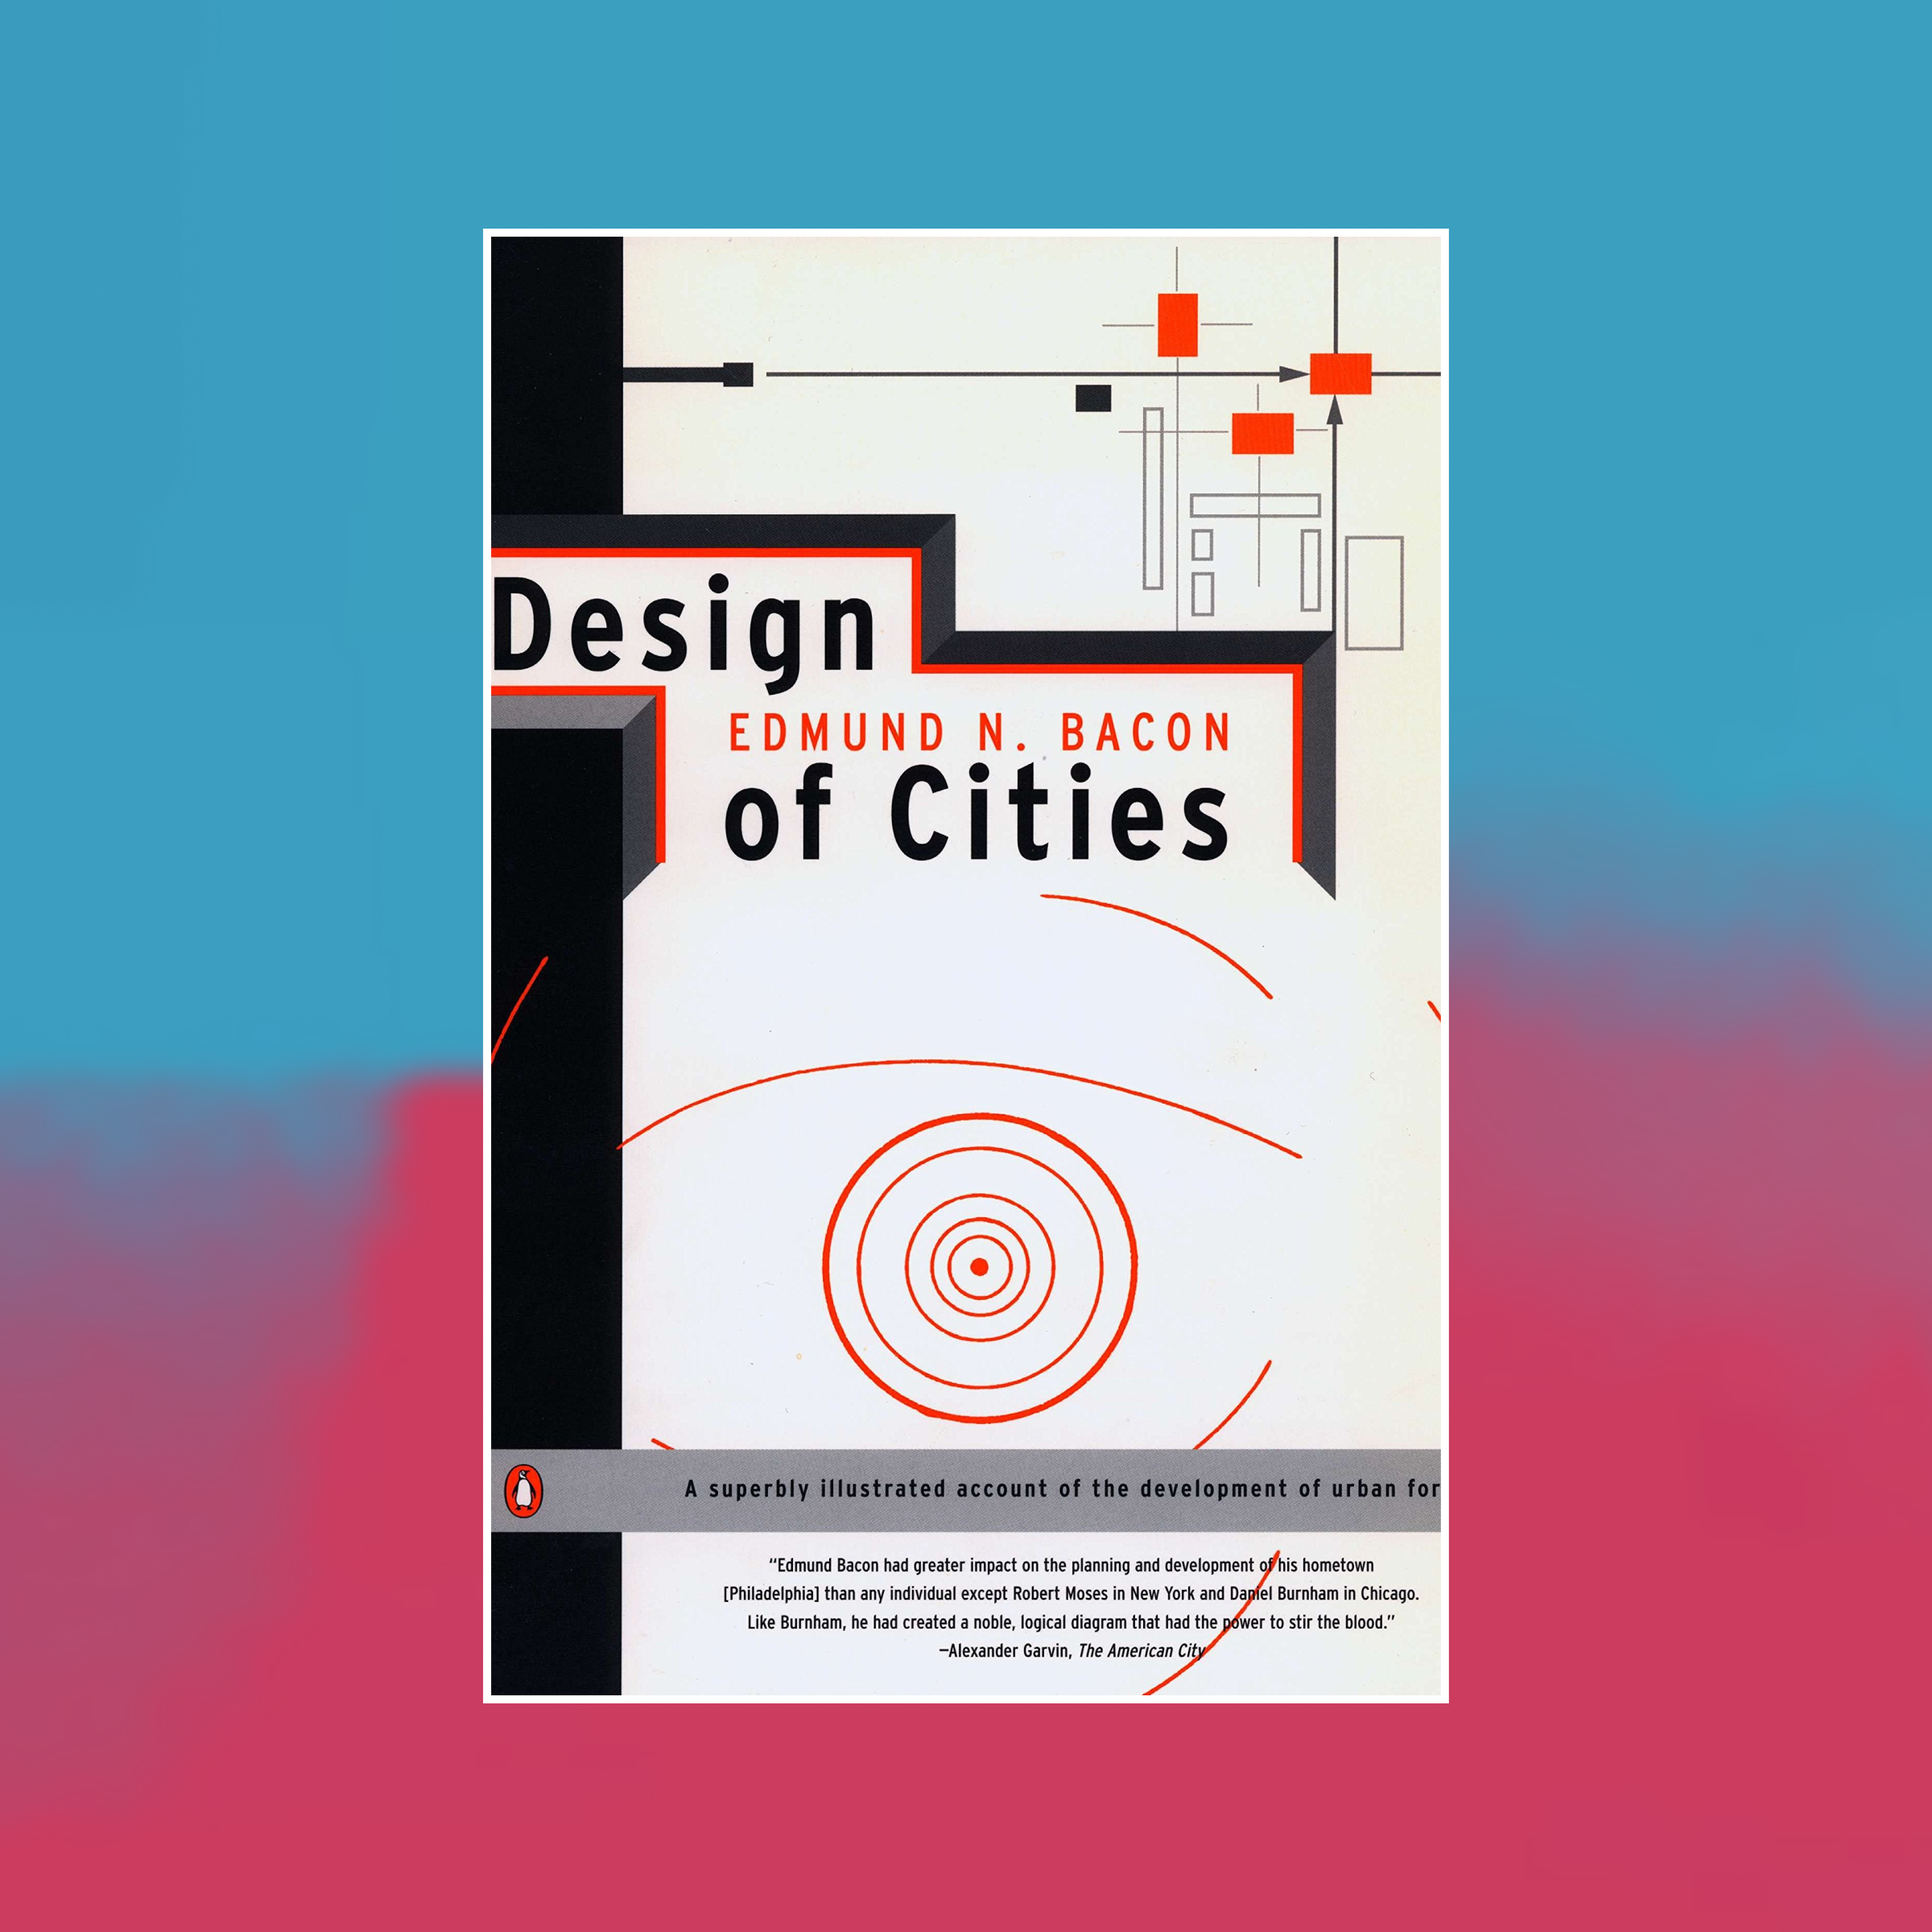 Book cover of Design of Cities against an abstract painted background